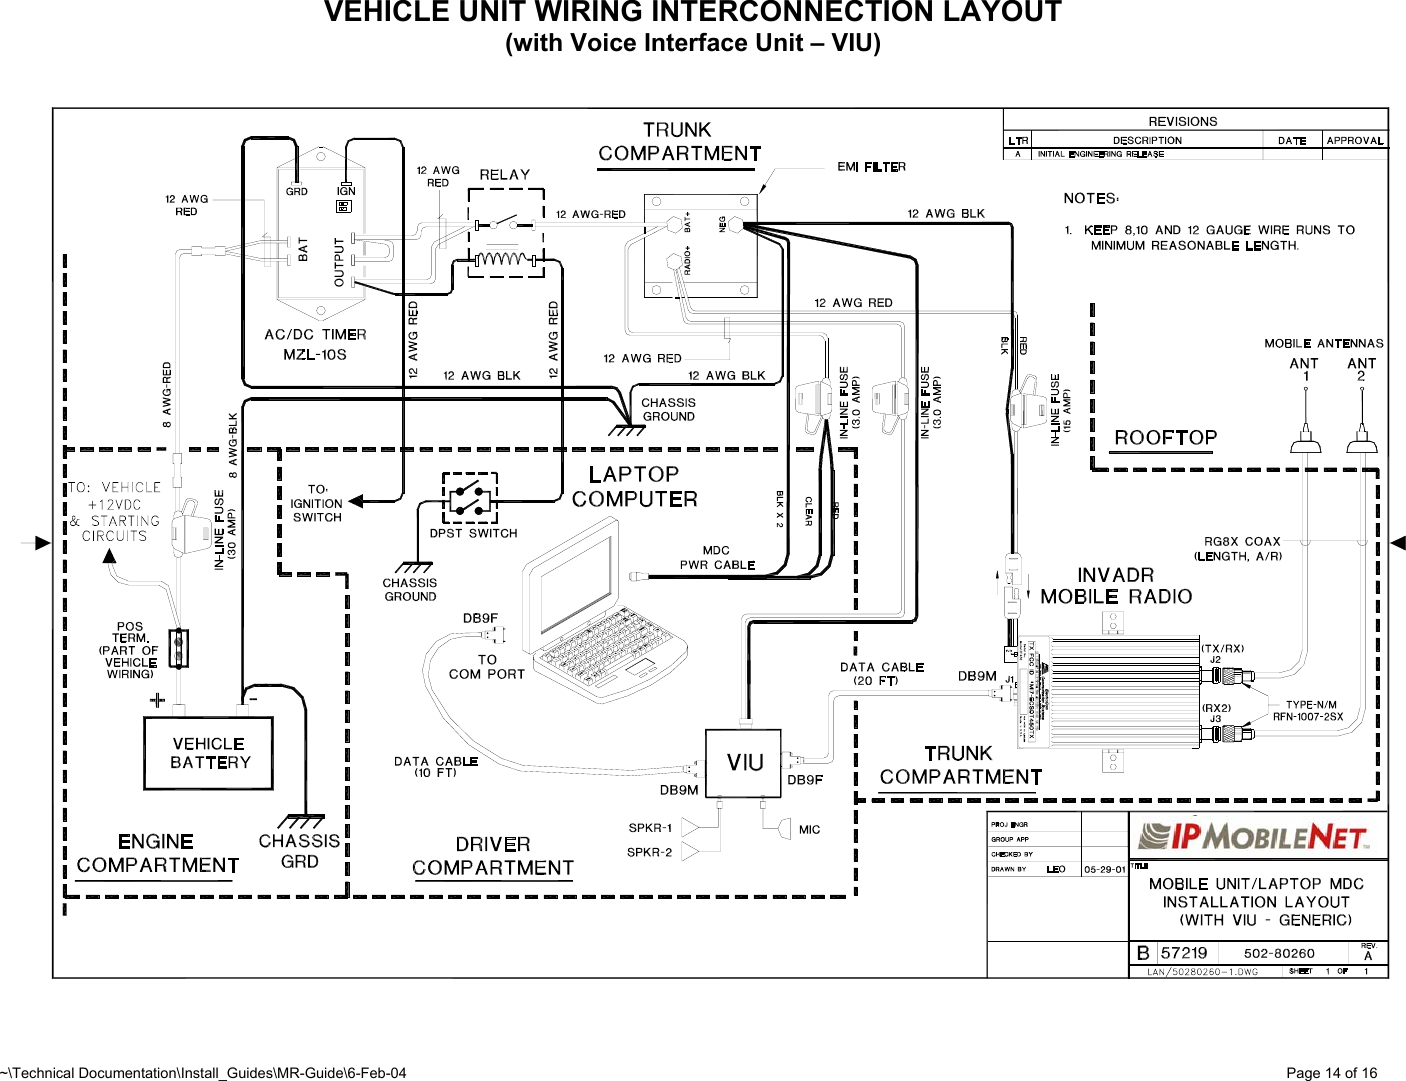 ~\Technical Documentation\Install_Guides\MR-Guide\6-Feb-04   Page 14 of 16 VEHICLE UNIT WIRING INTERCONNECTION LAYOUT (with Voice Interface Unit – VIU)                      